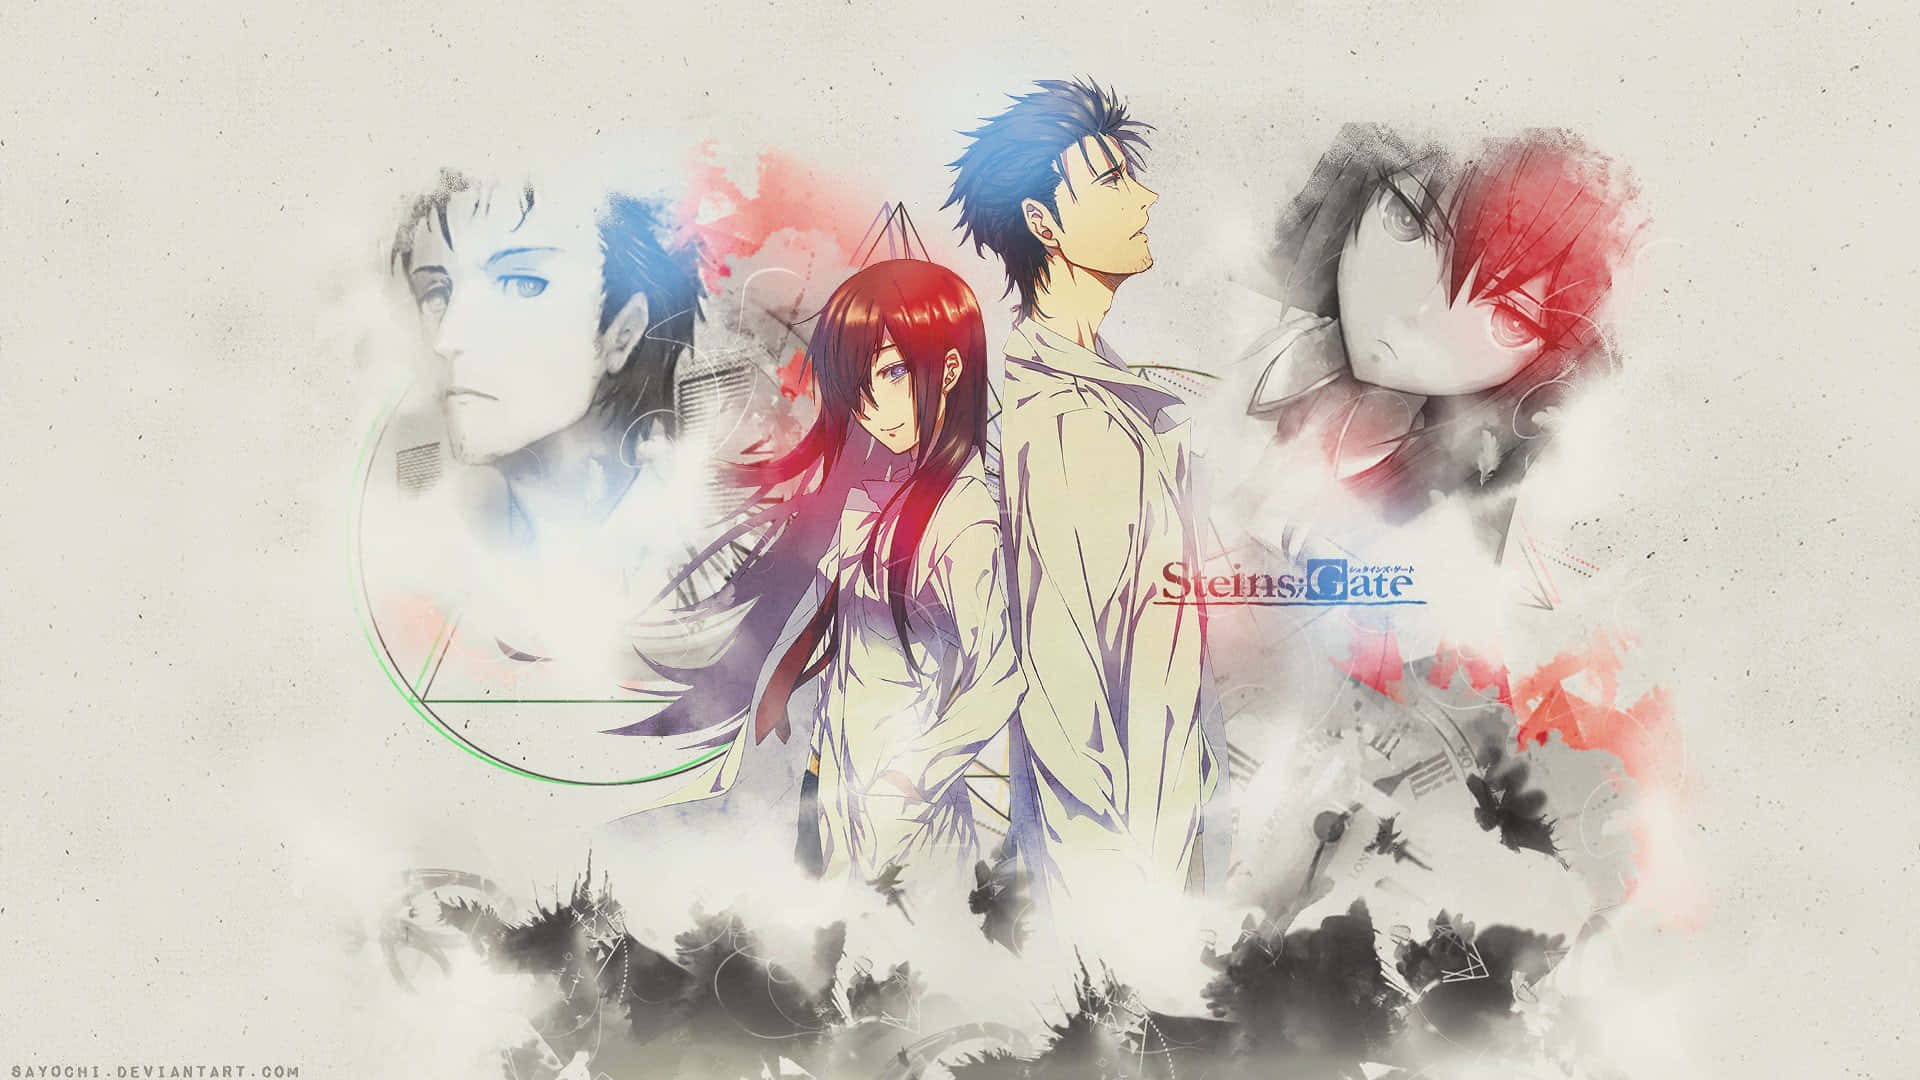 Steins;Gate Characters in Scenic City